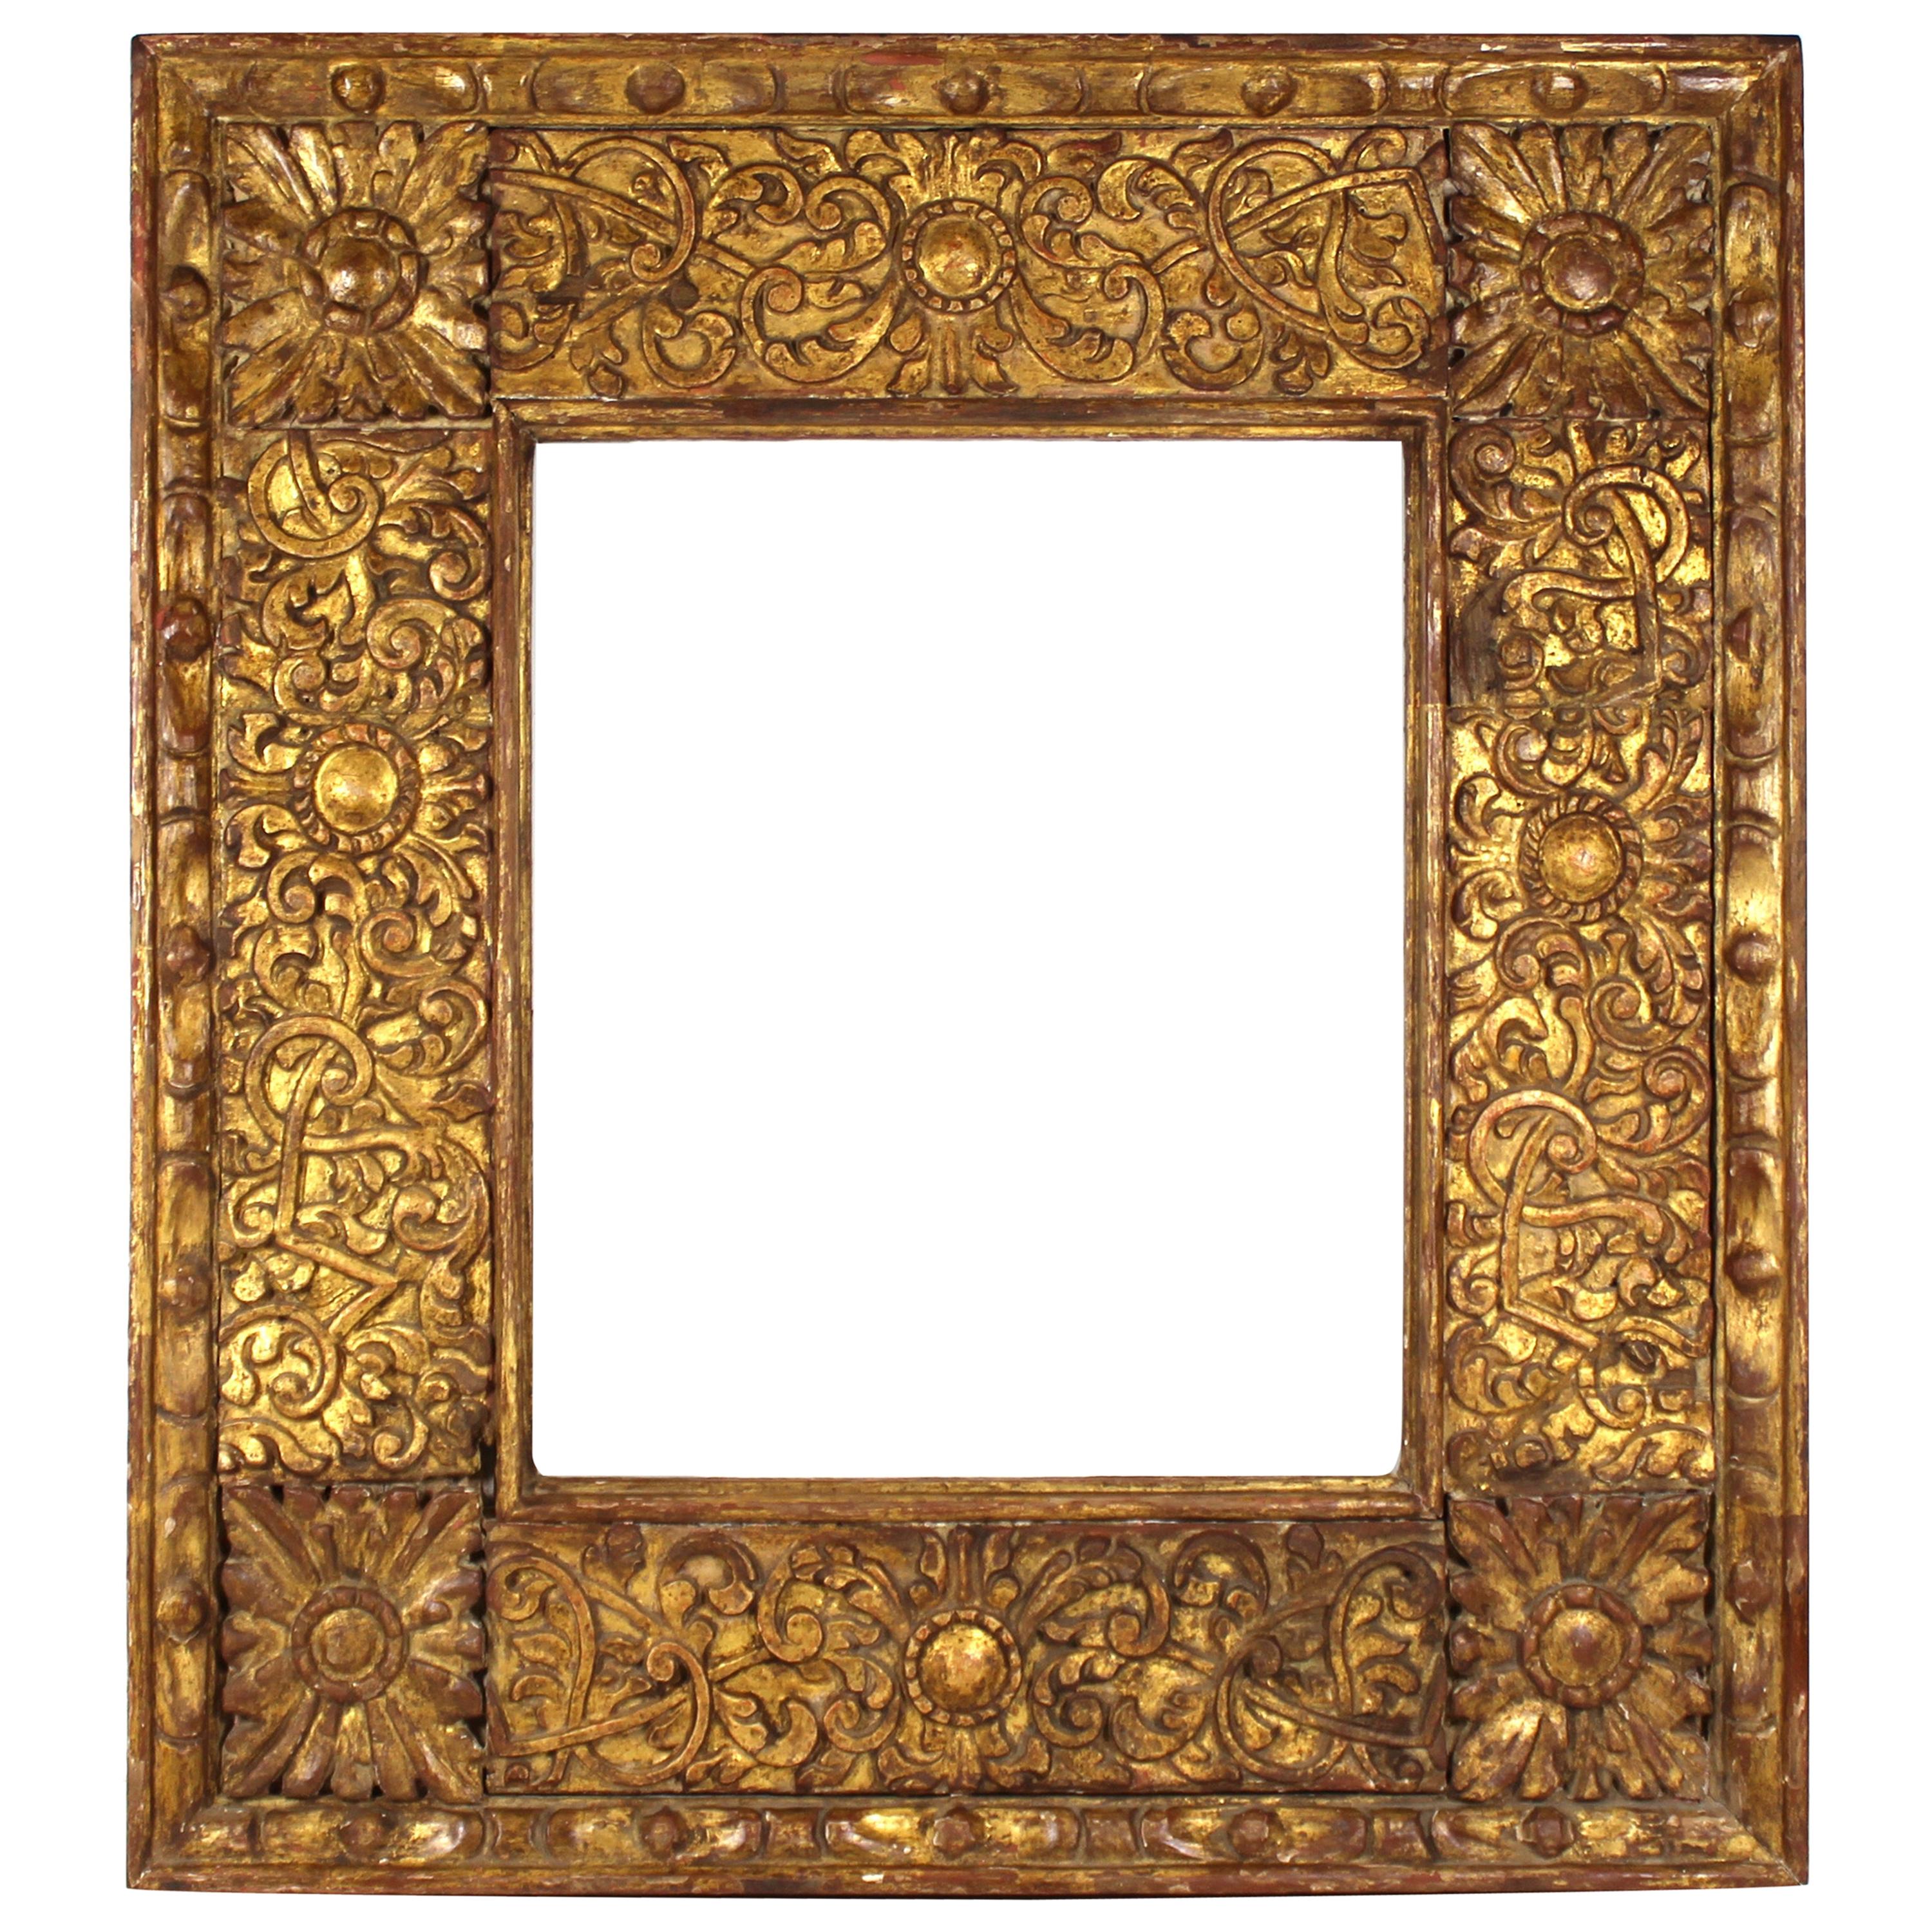 Spanish Colonial Baroque Giltwood Picture Frame with Heavy Carved Foliage For Sale